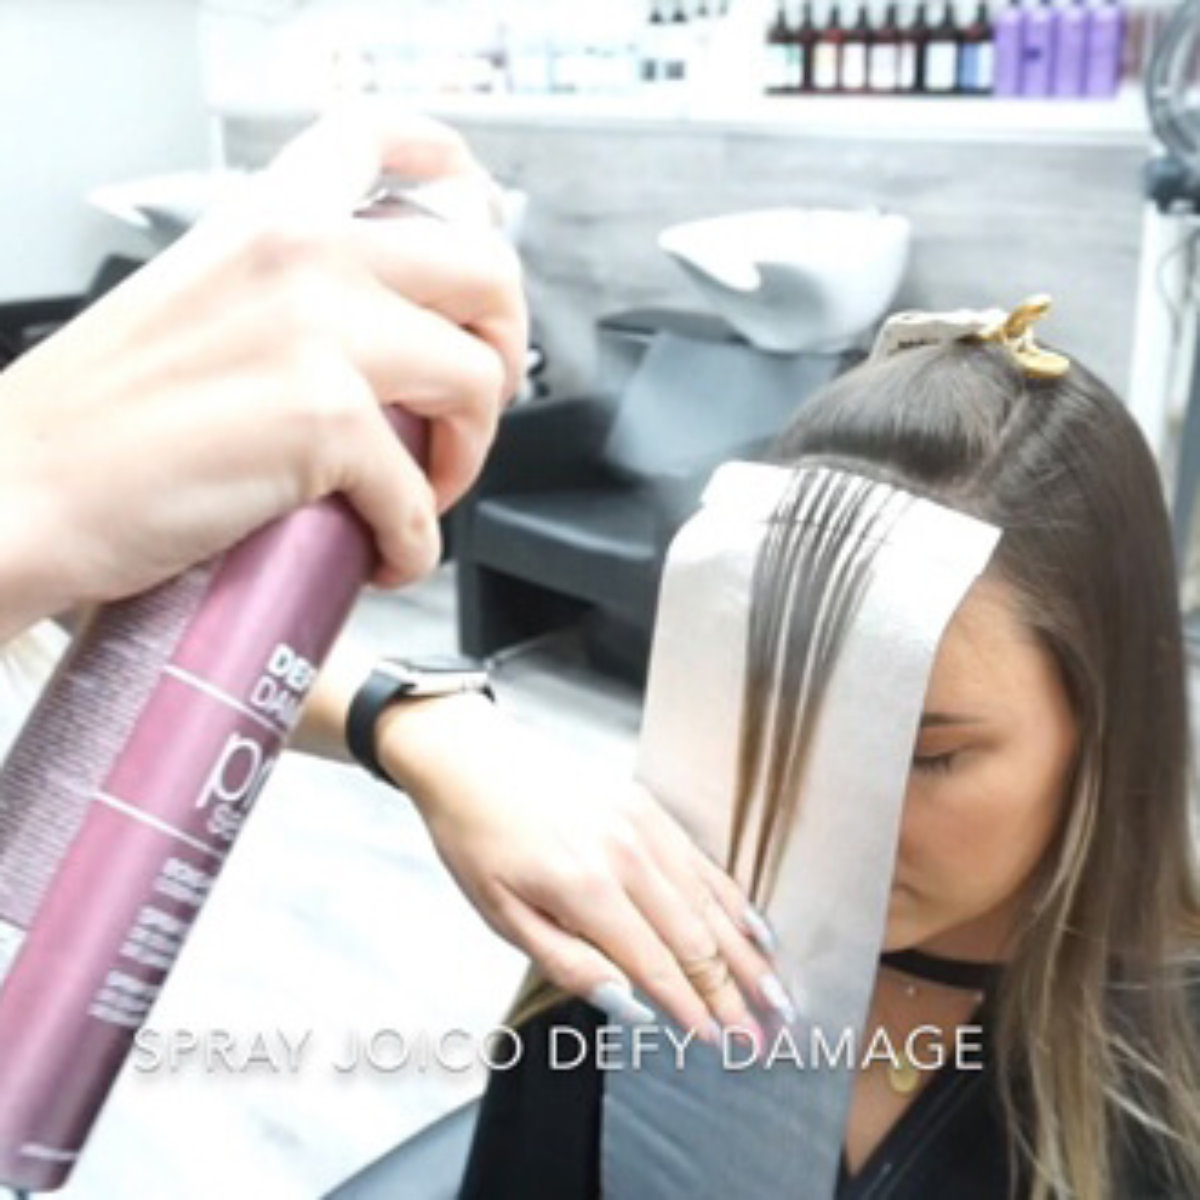 Womens Hair being colored with hair dye